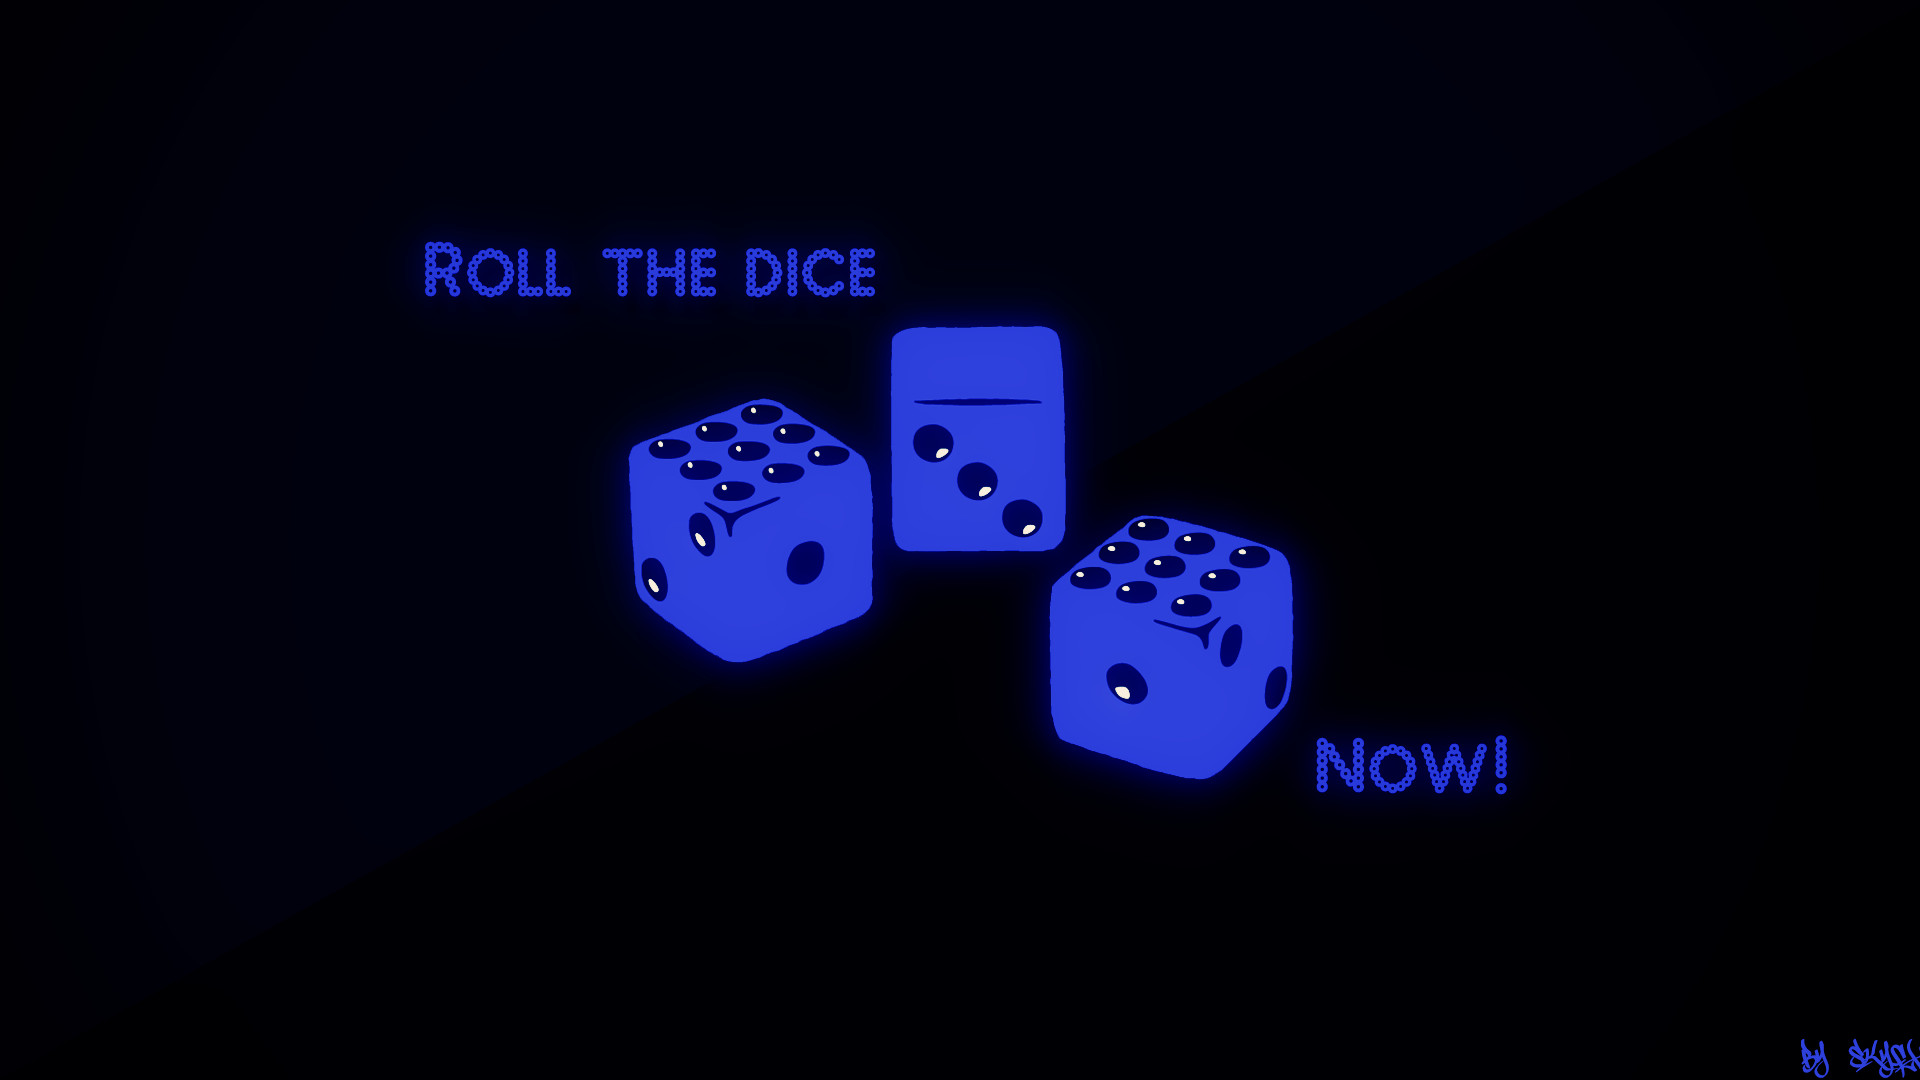 1920x1080 Roll the dice NOW! - WALLPAPER by TheSkyFx on DeviantArt